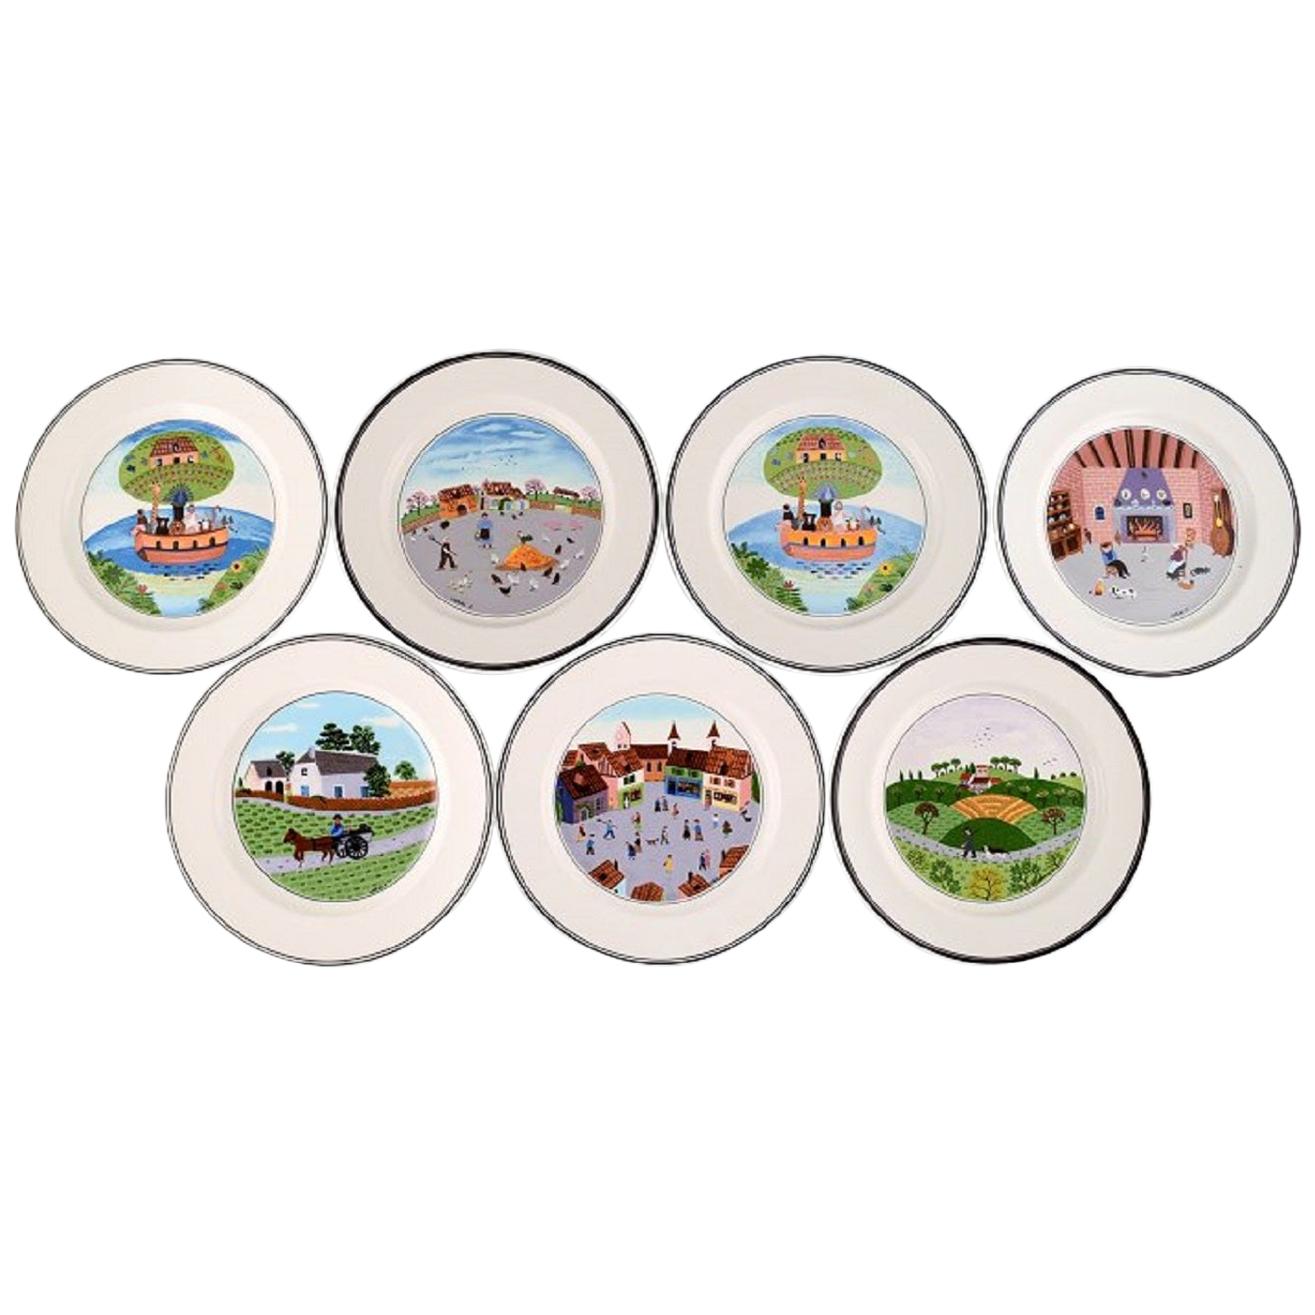 Villeroy & Boch Naif Dinner Service in Porcelain, a Set of Seven Lunch Plates